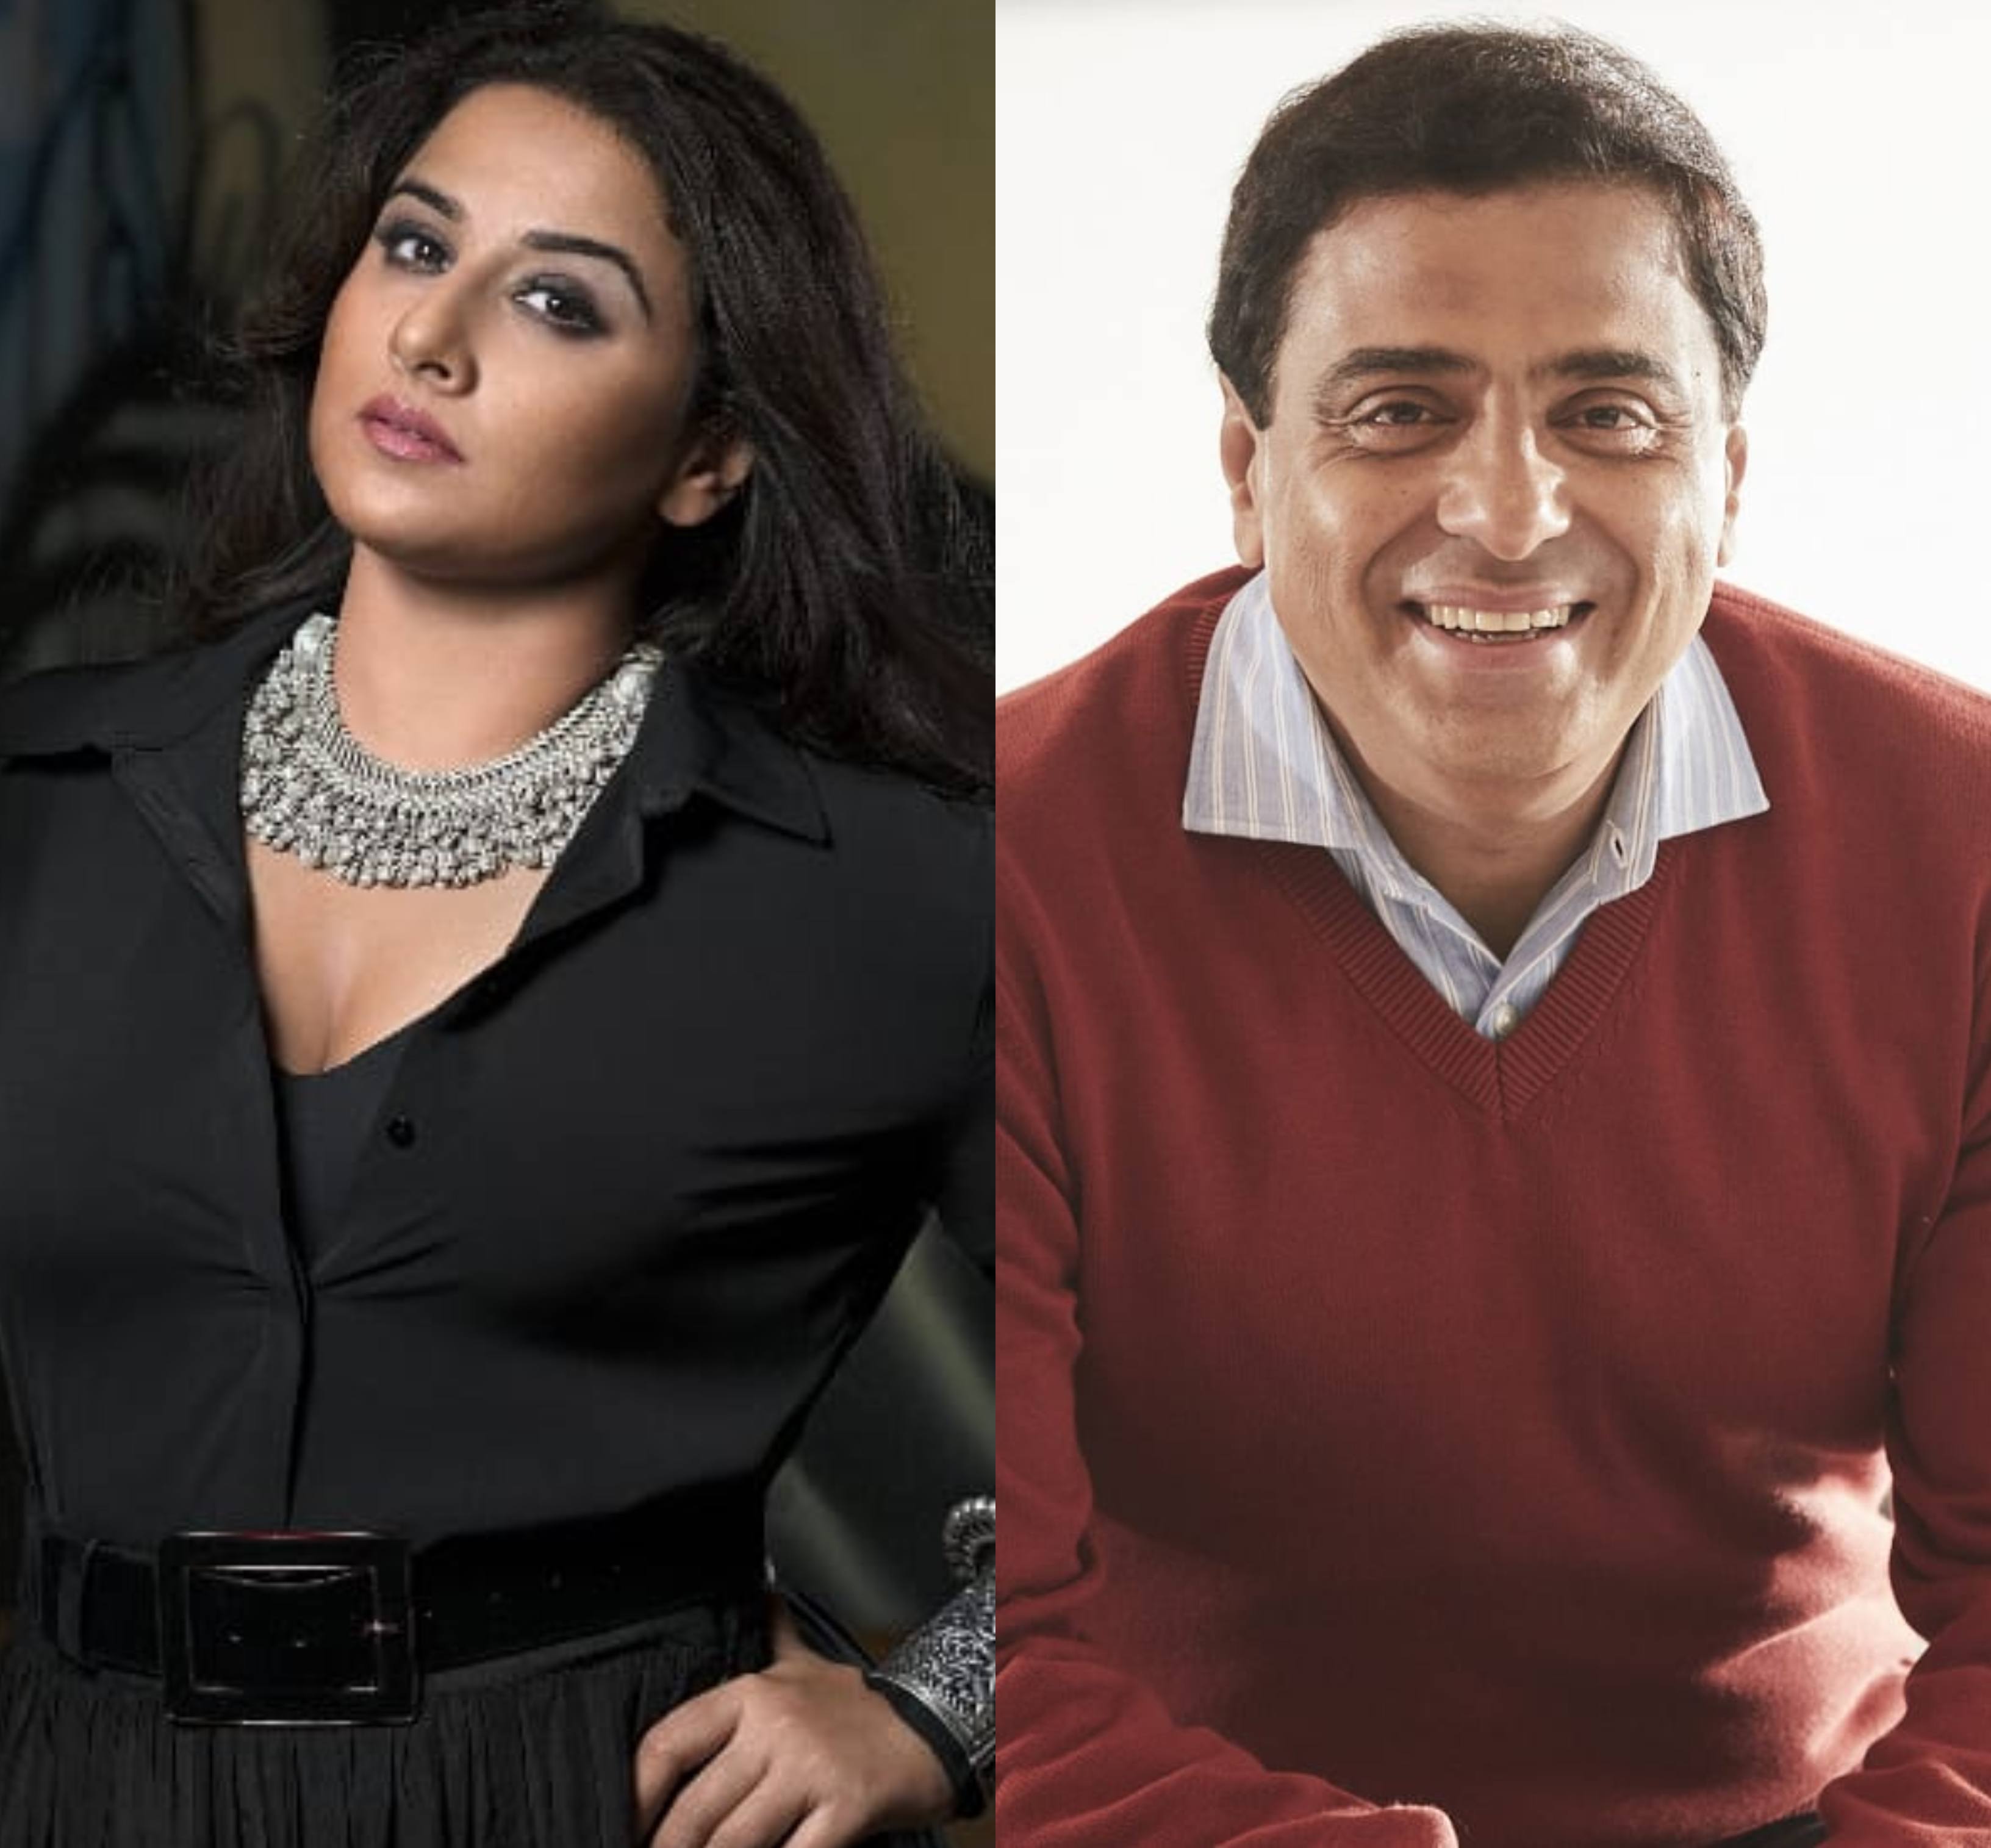 Vidya Balan To Collaborate With Ronnie Screwvala For A Short Film, Natkhat